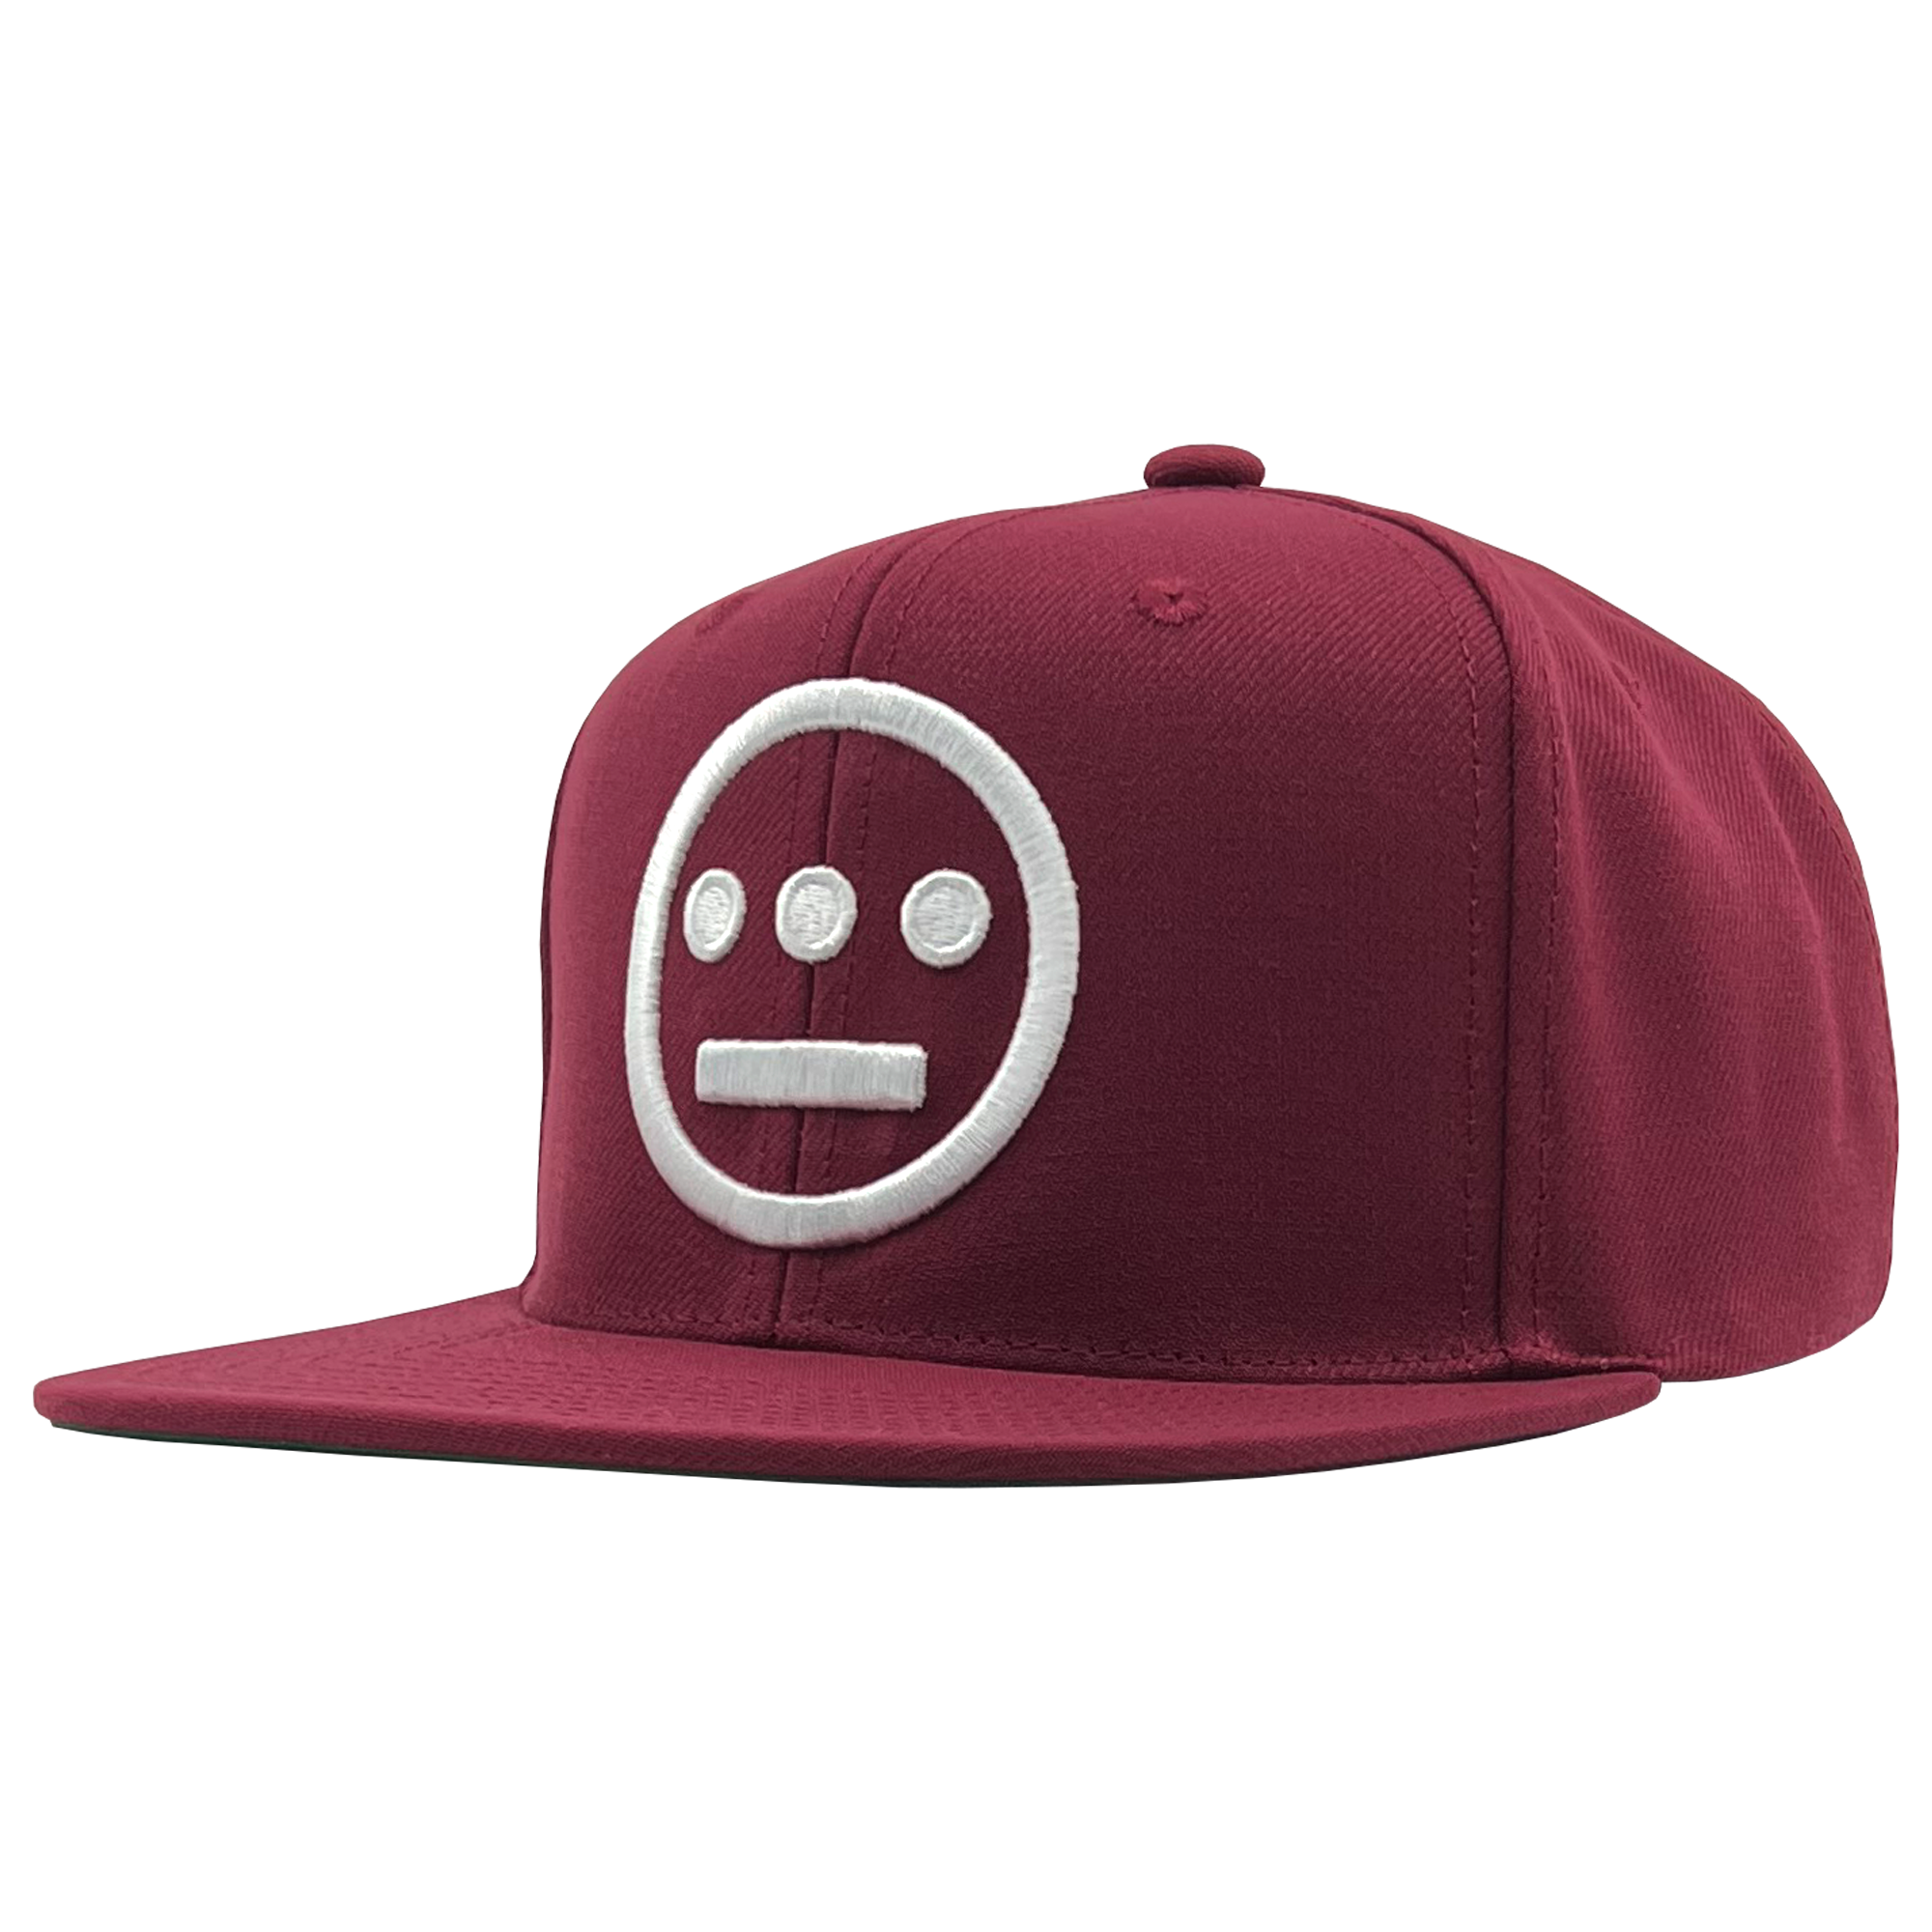 Side view of cardinal red Mitchell & Ness snapback cap with white embroidered Hiero Hip Hop crew logo.